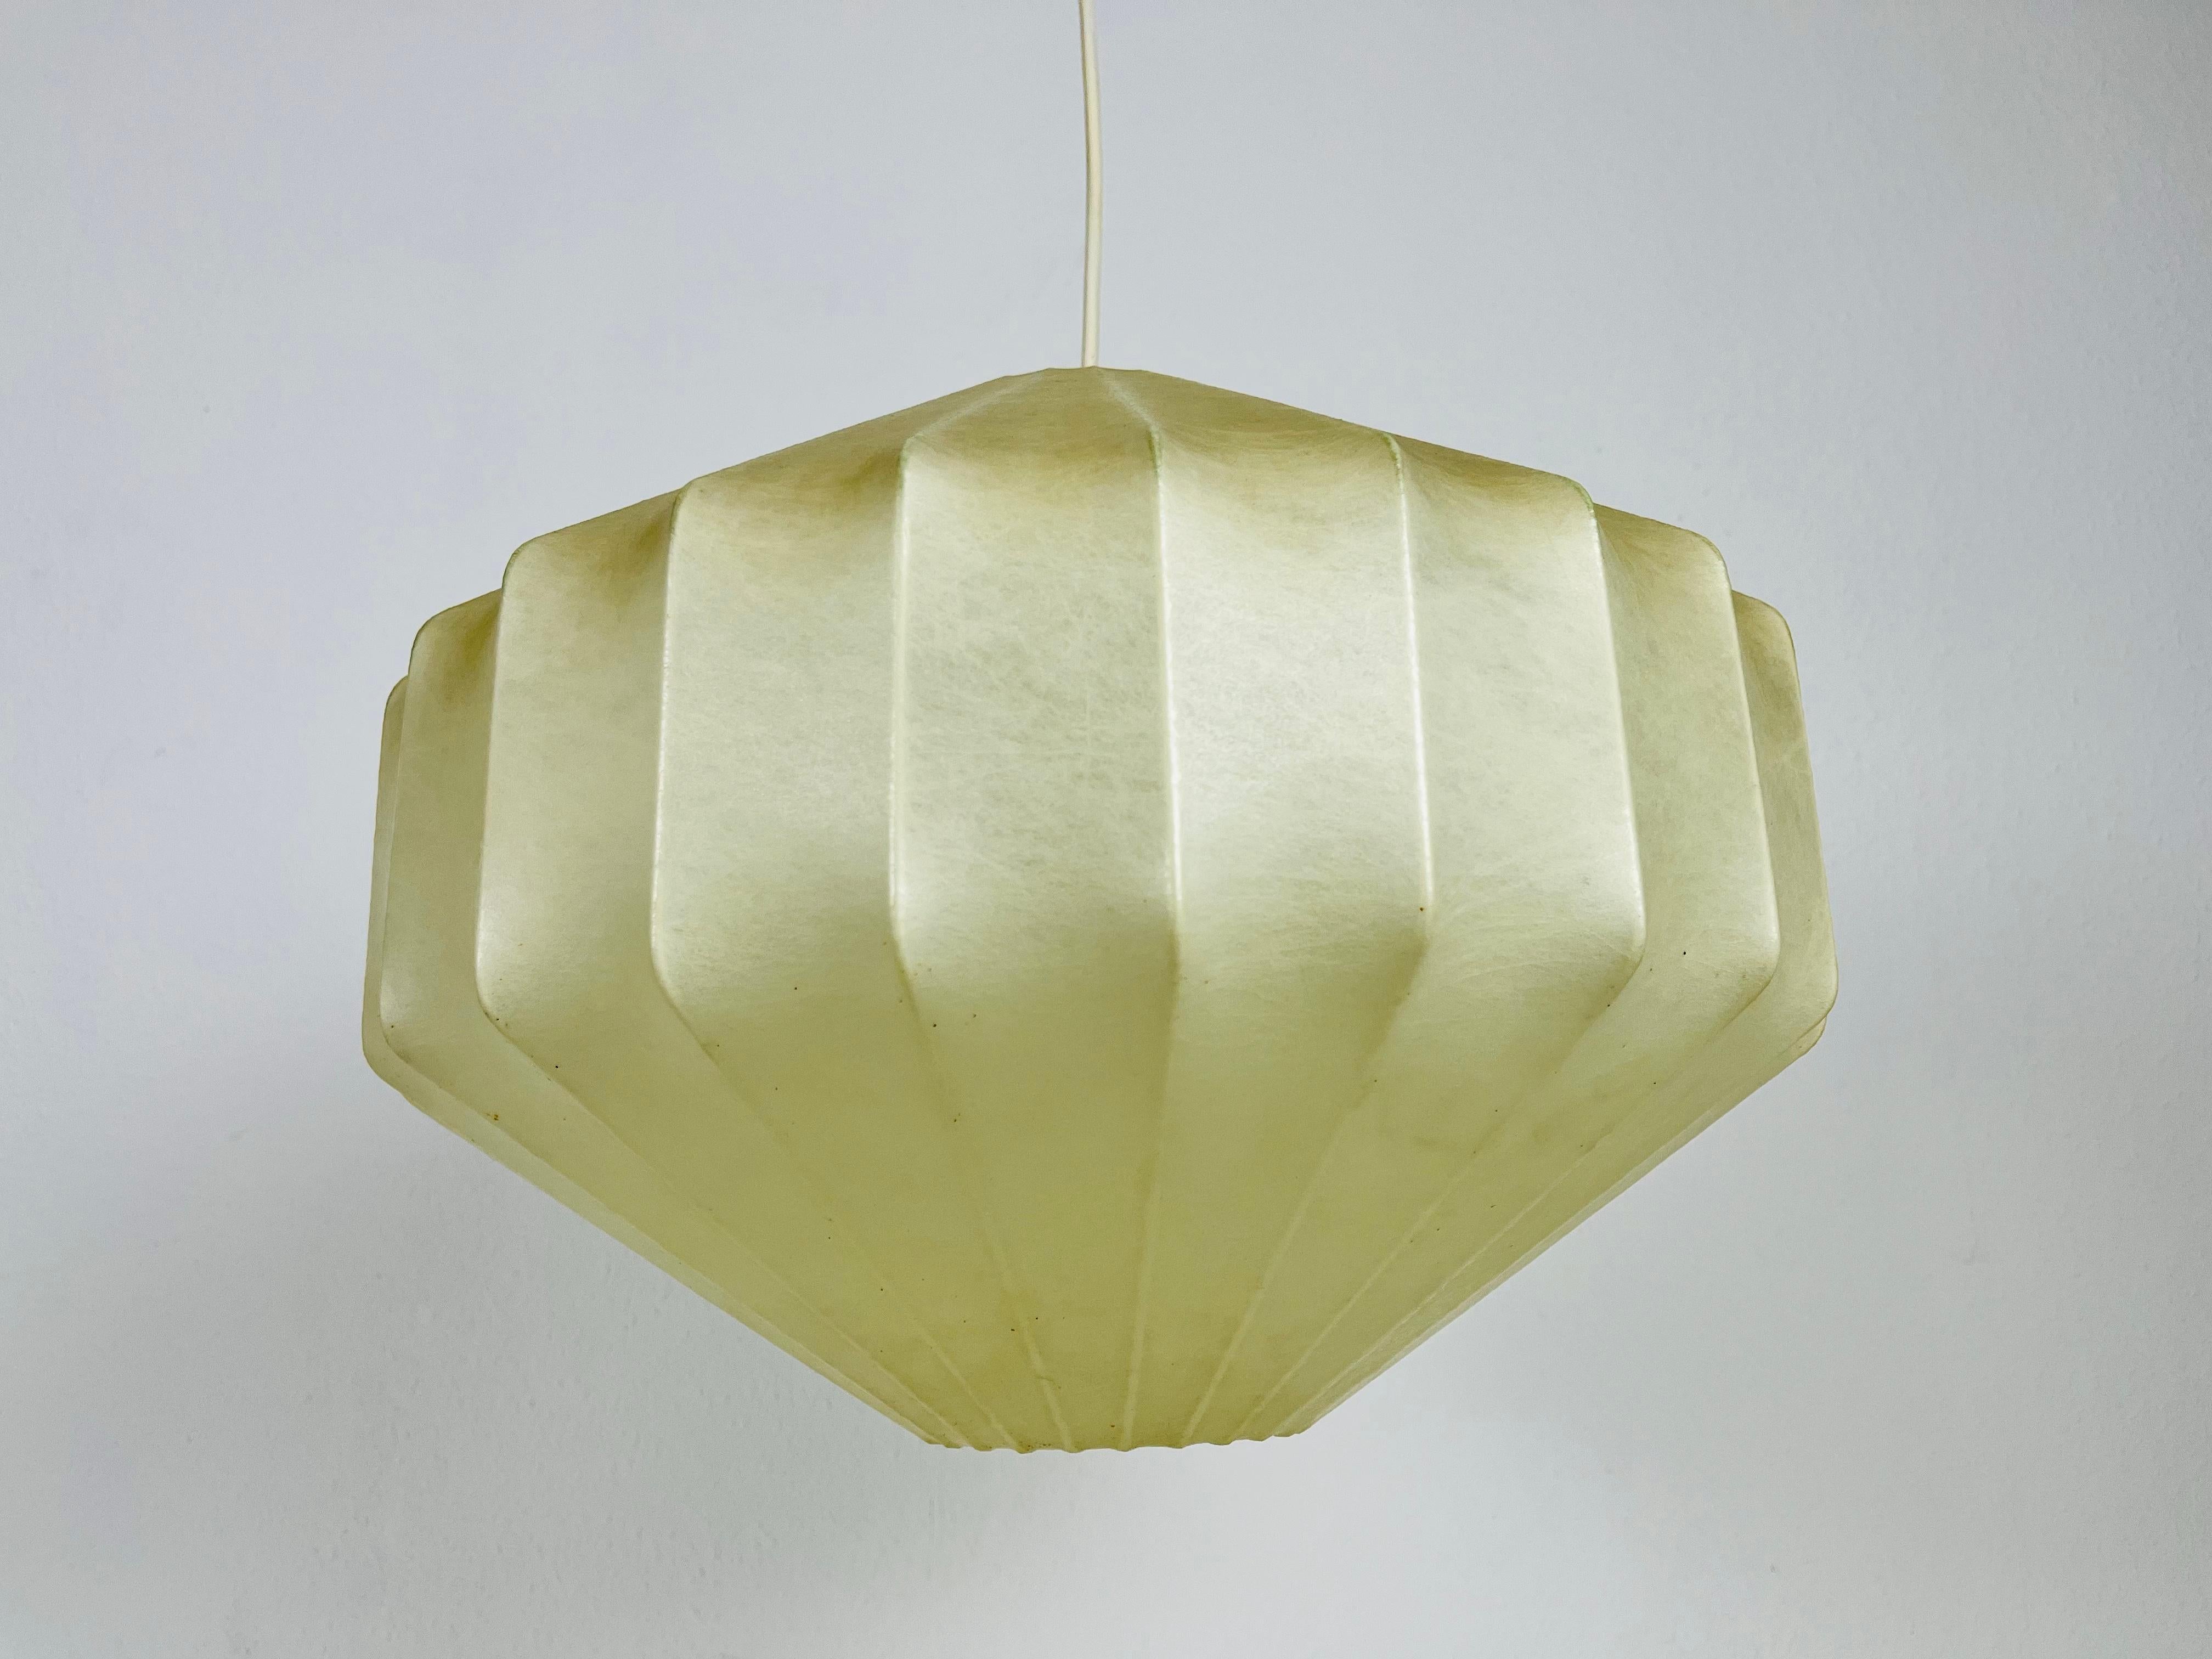 A losange cocoon pendant lamp made in Italy in the 1960s. The hanging lamp has a design similar to the lightings made by Achille Castiglioni. The lamp shade is of original resin and has a losange shape.

Measurements:

Height: 27-90